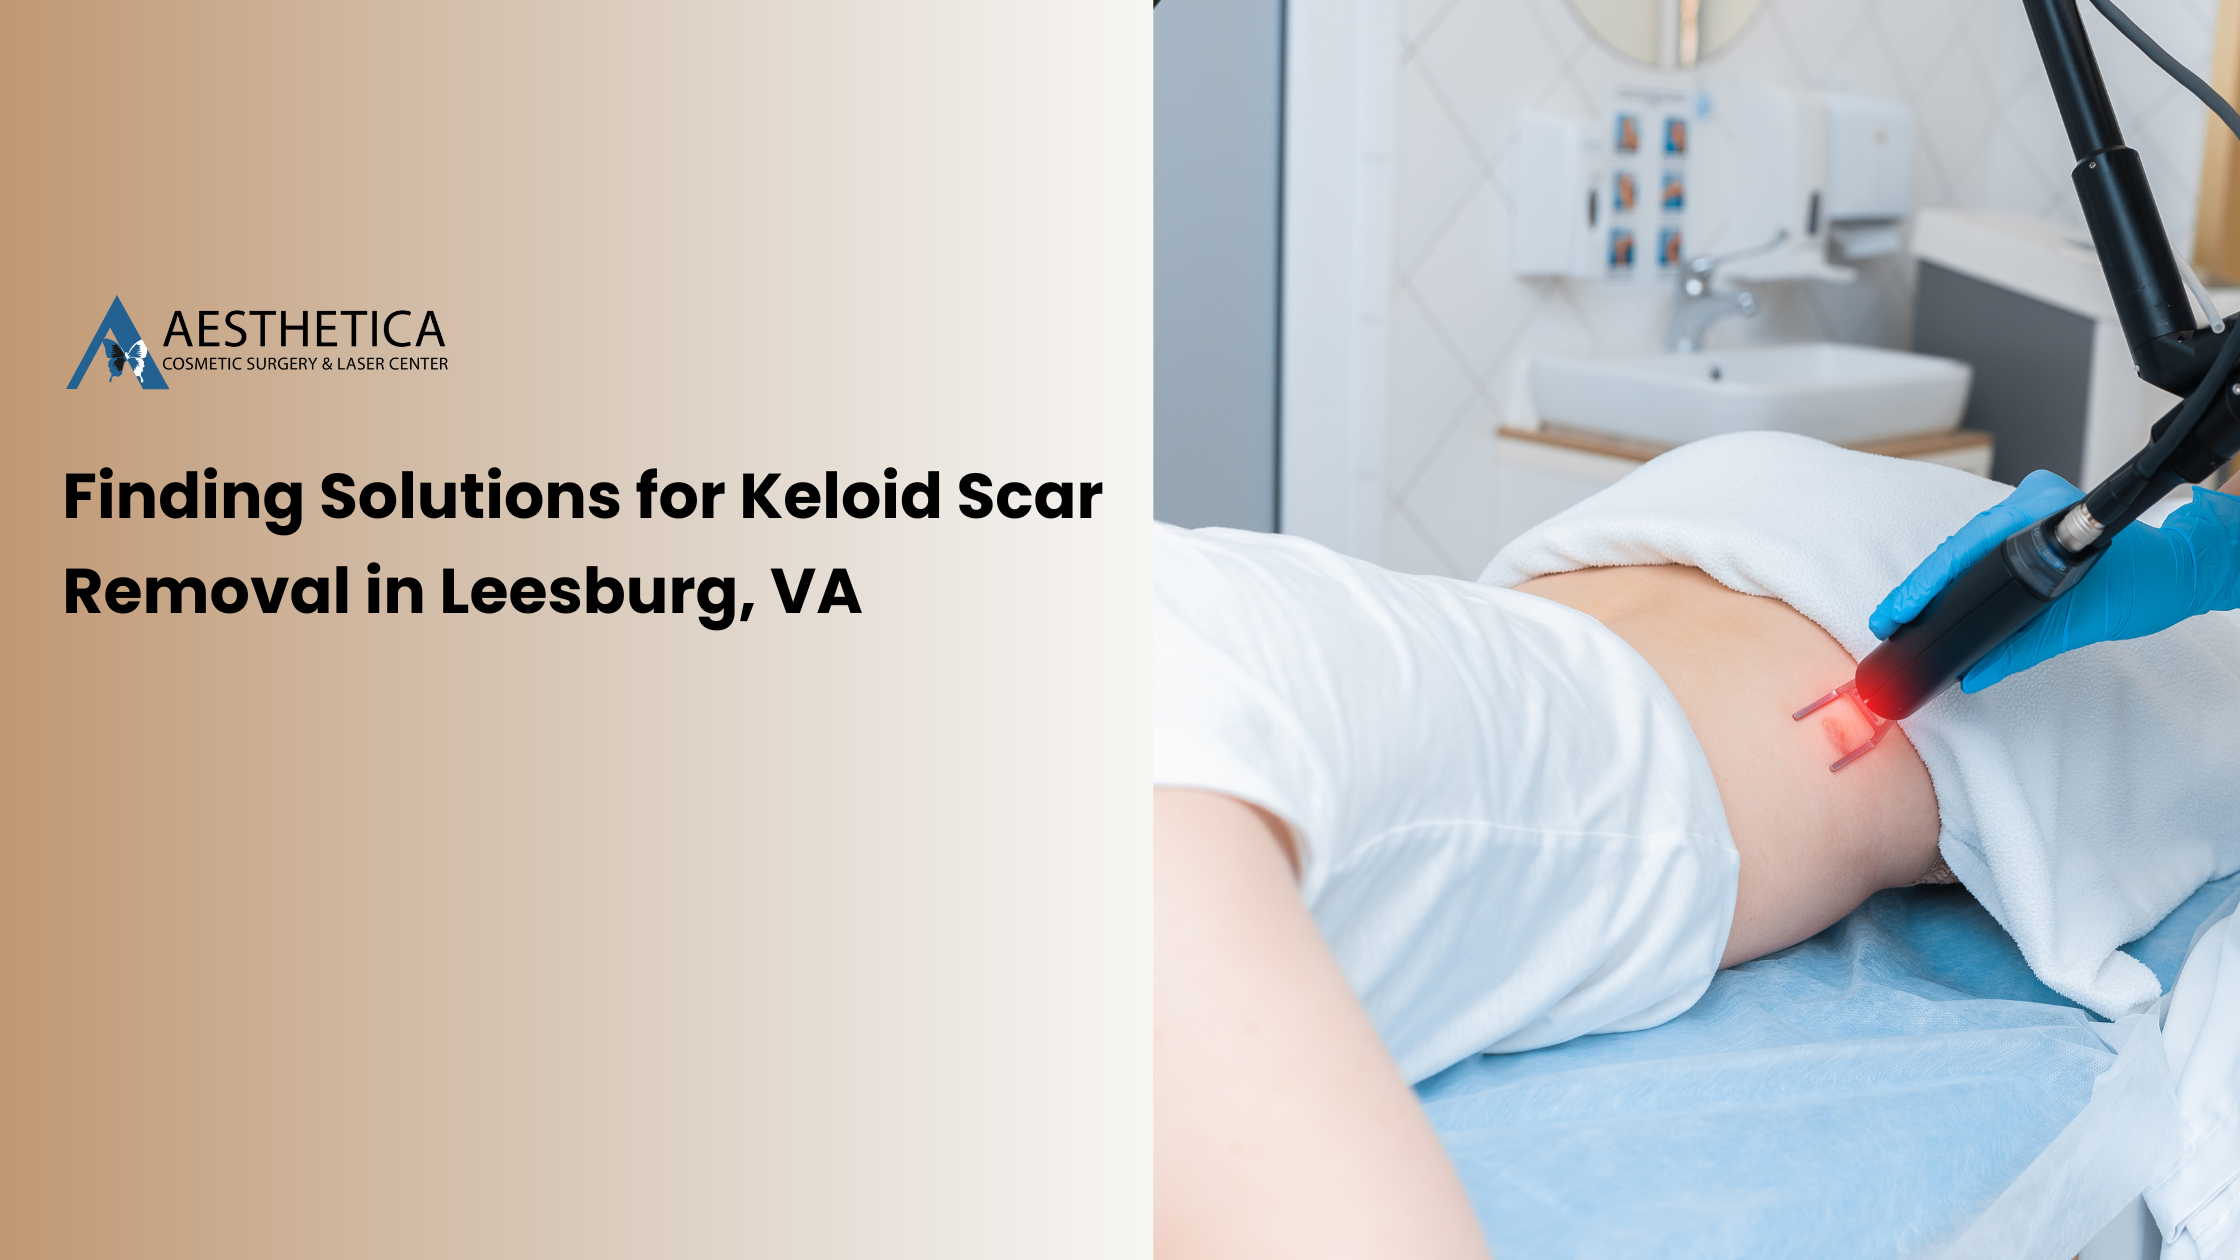 Finding Solutions for Keloid Scar Removal in Leesburg, VA